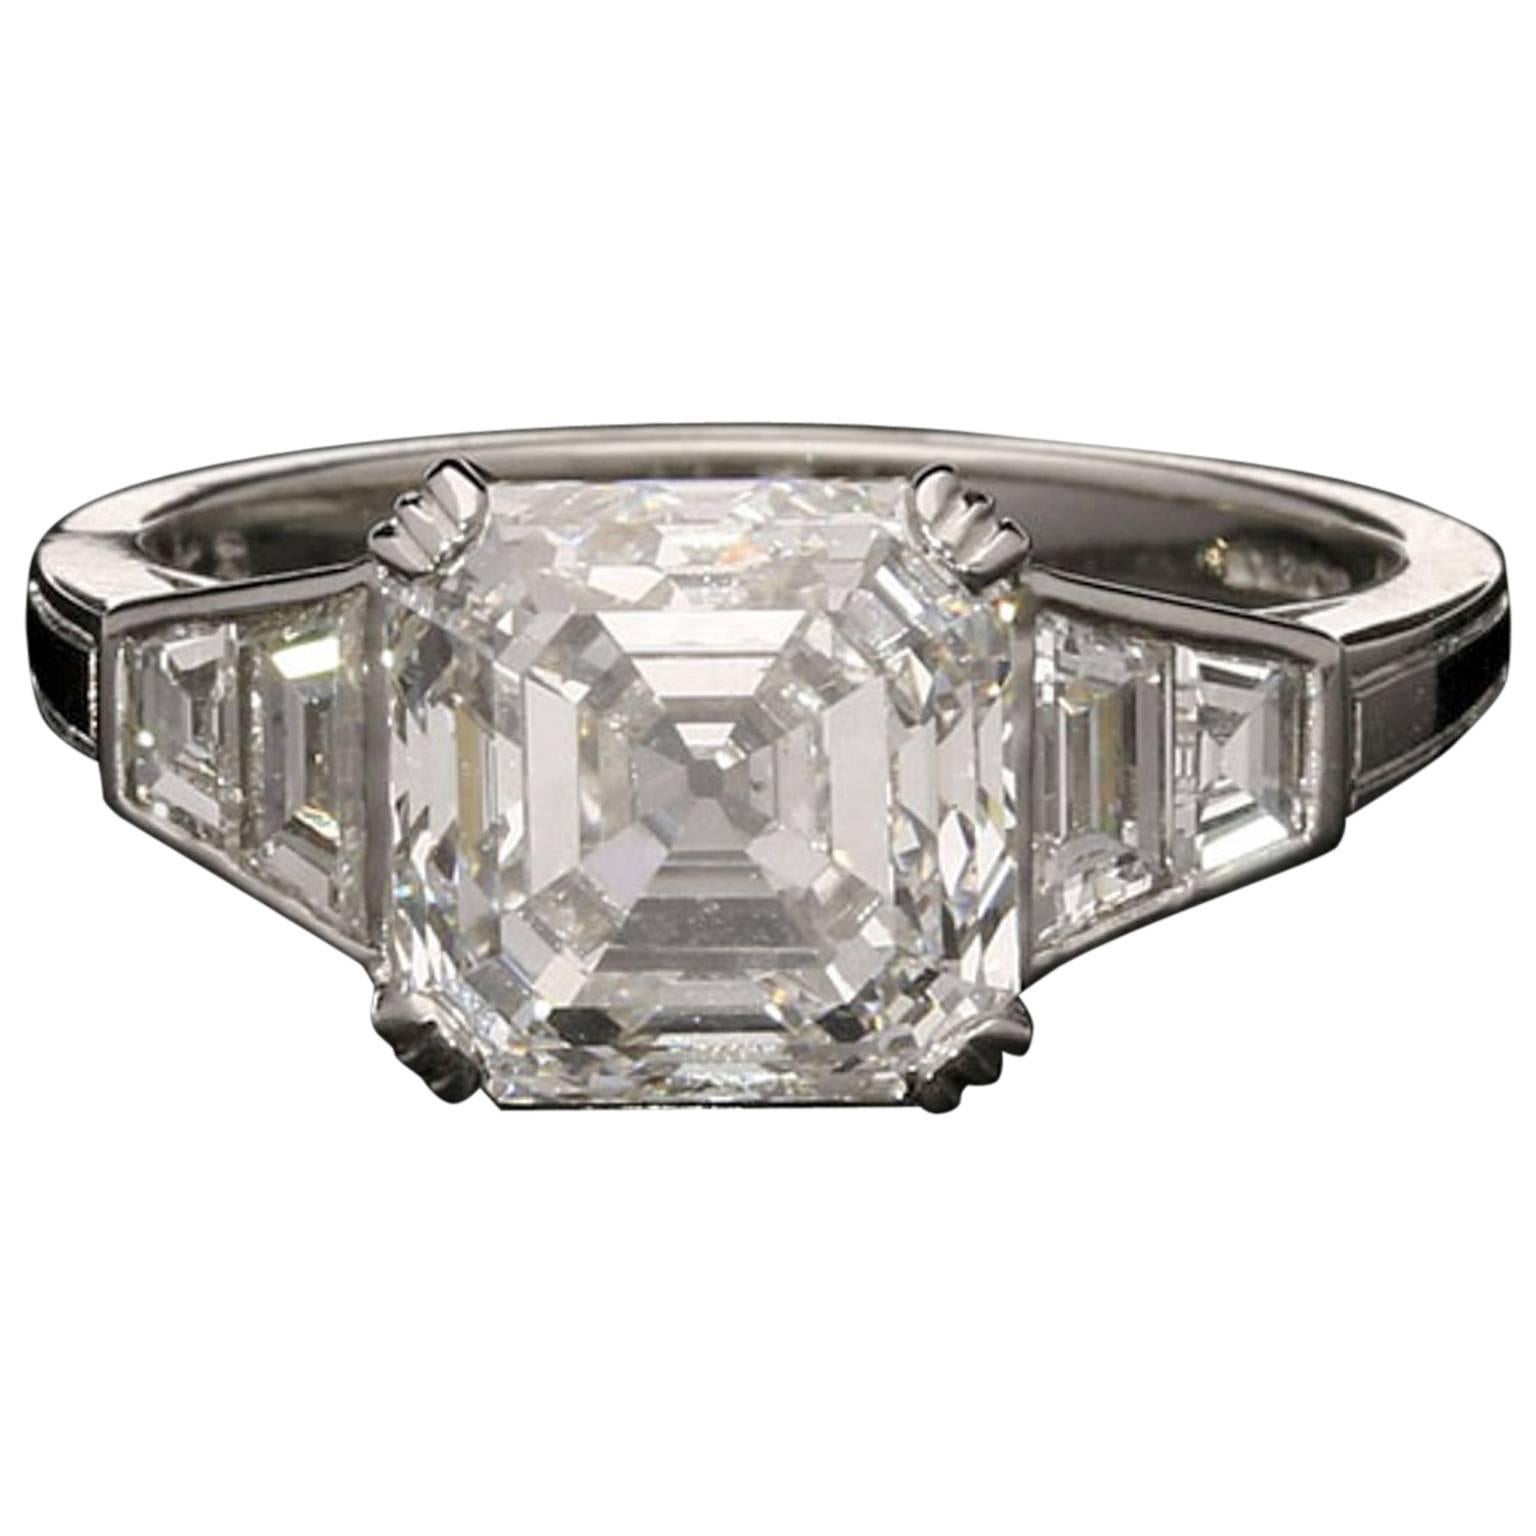 A 3.31ct Asscher Cut Diamond Ring With Graduated Trapezoid Shoulders By Hancock